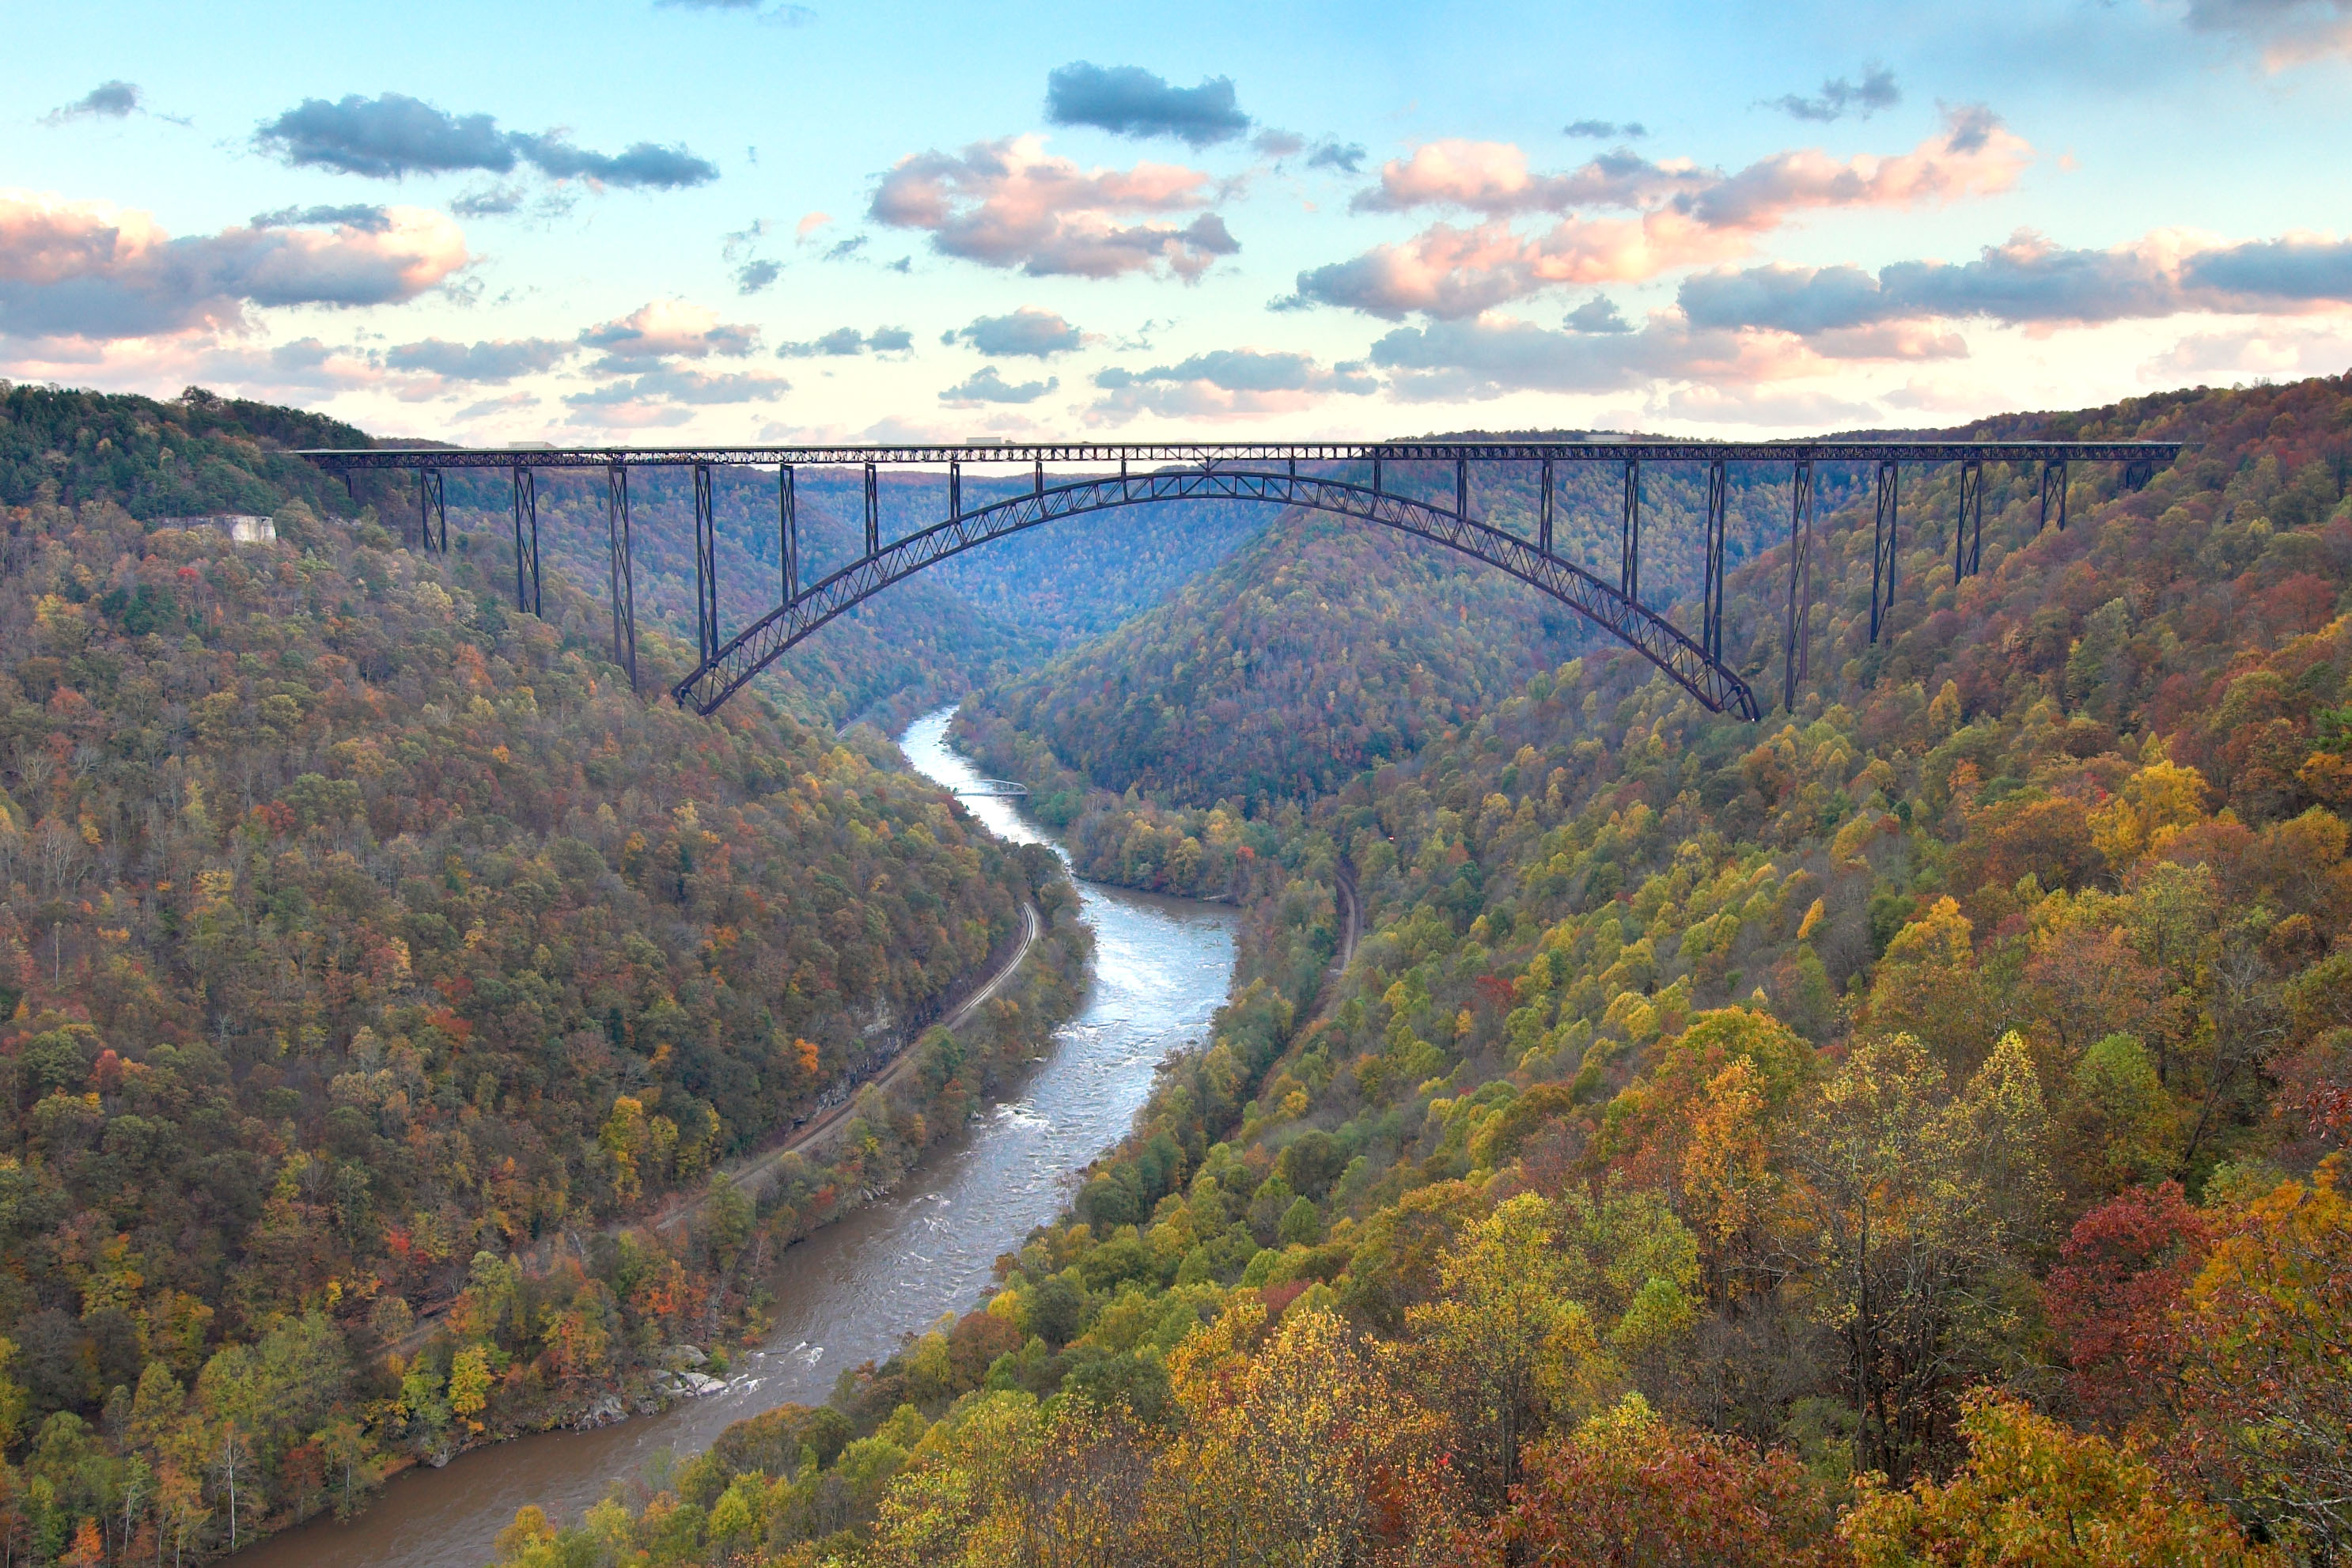 bridge spans a river and gorge with fall colors